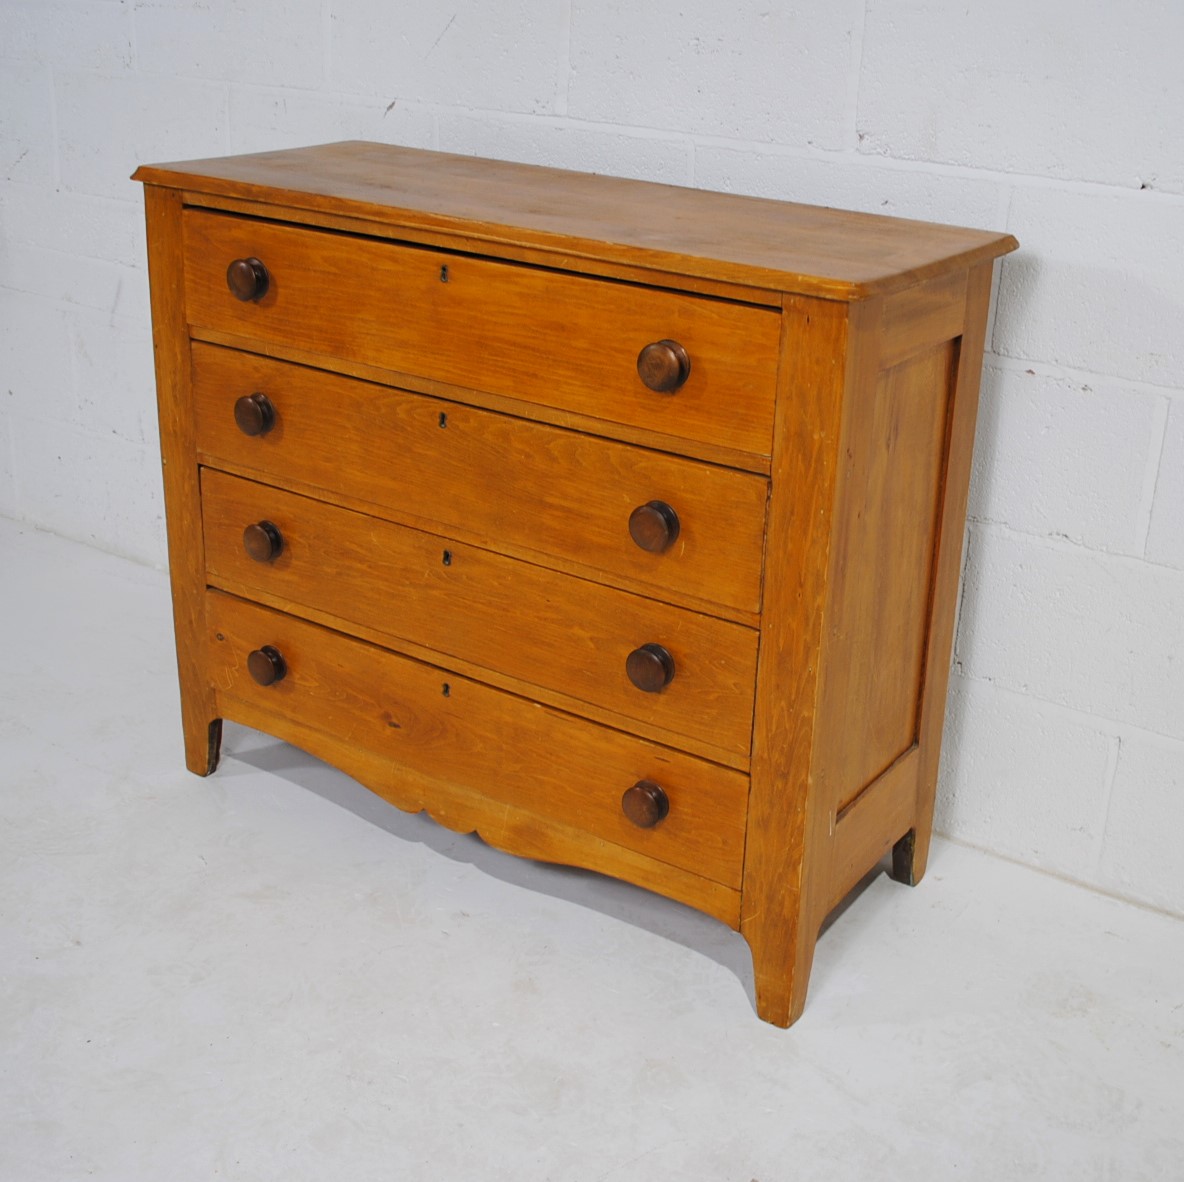 An American pine chest of four drawers - length 105cm, depth 41.5cm, height 87cm - Image 3 of 7